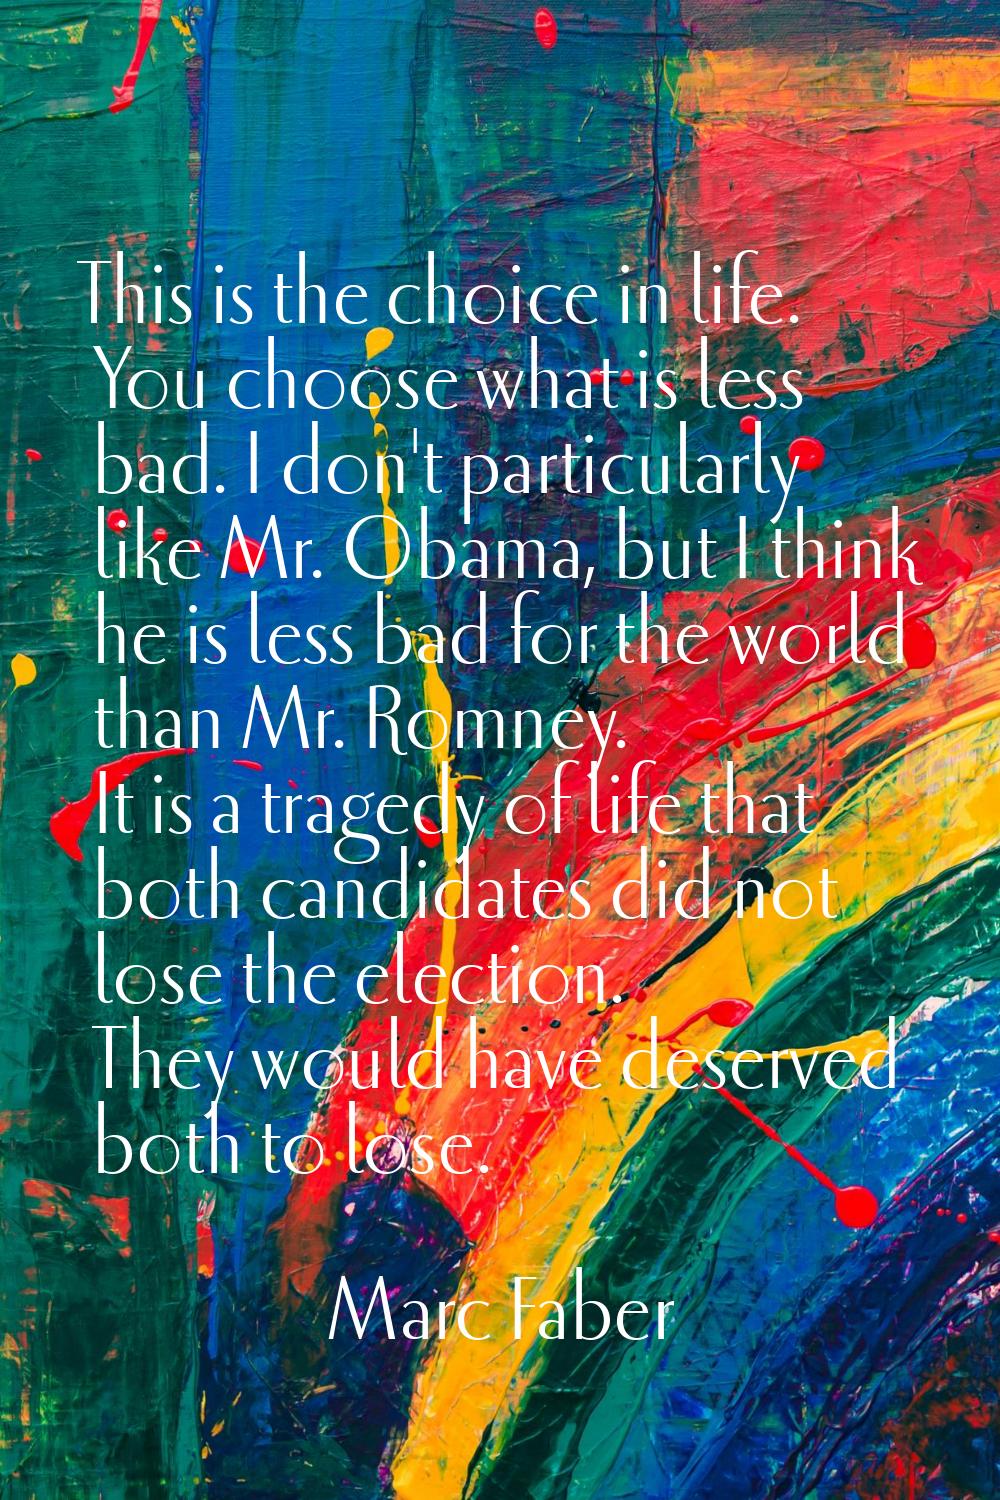 This is the choice in life. You choose what is less bad. I don't particularly like Mr. Obama, but I